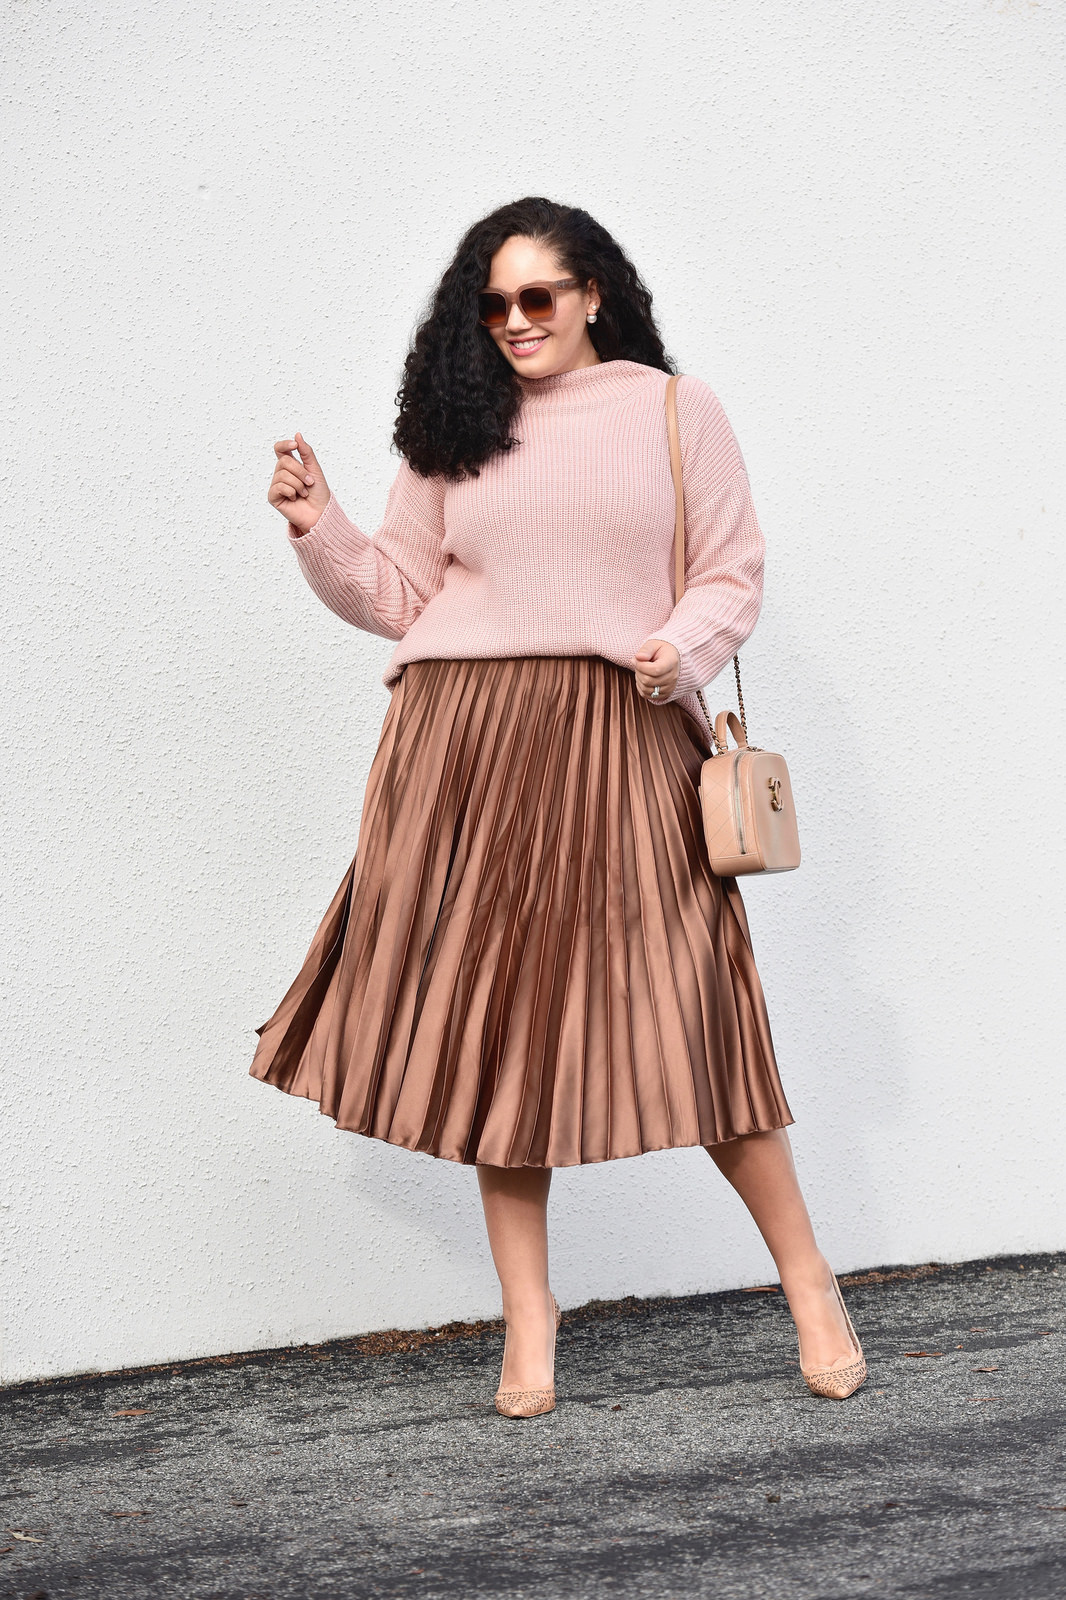 Satin Skirt Trend by Girl With Curves